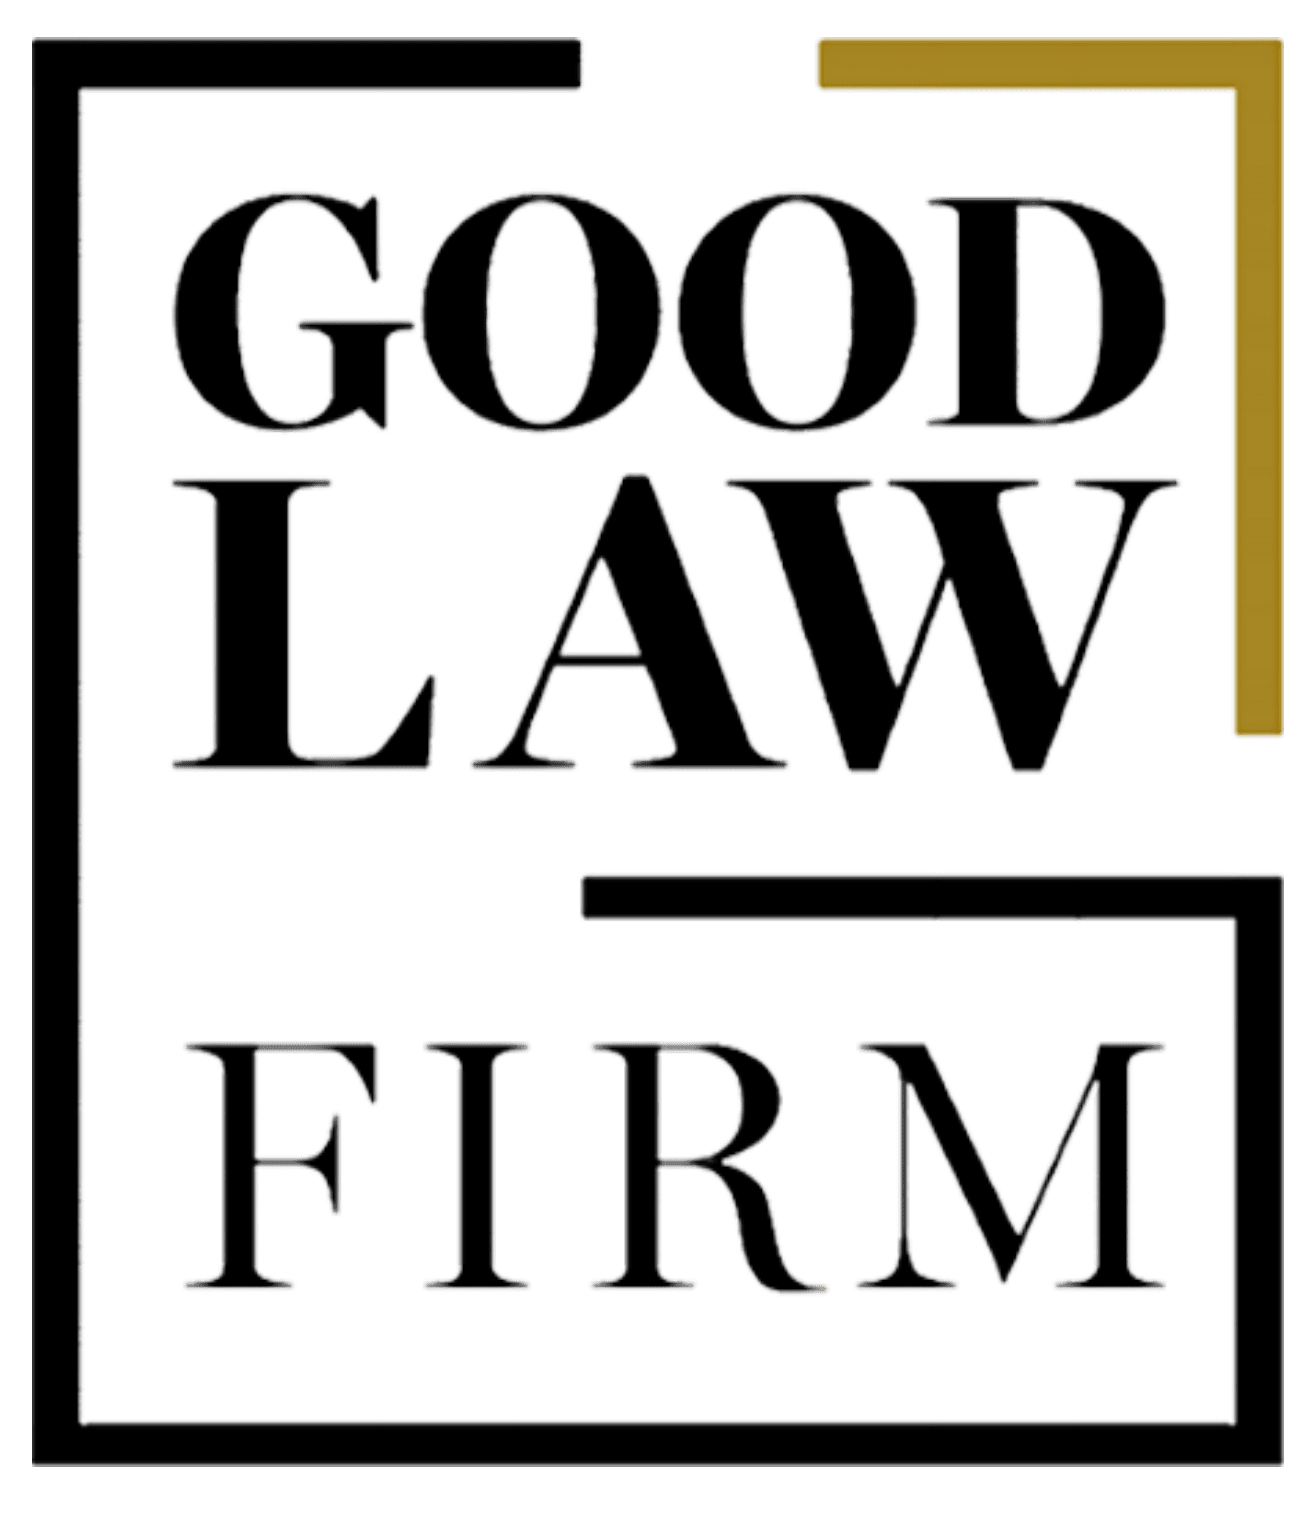 GOOD LAW FIRM